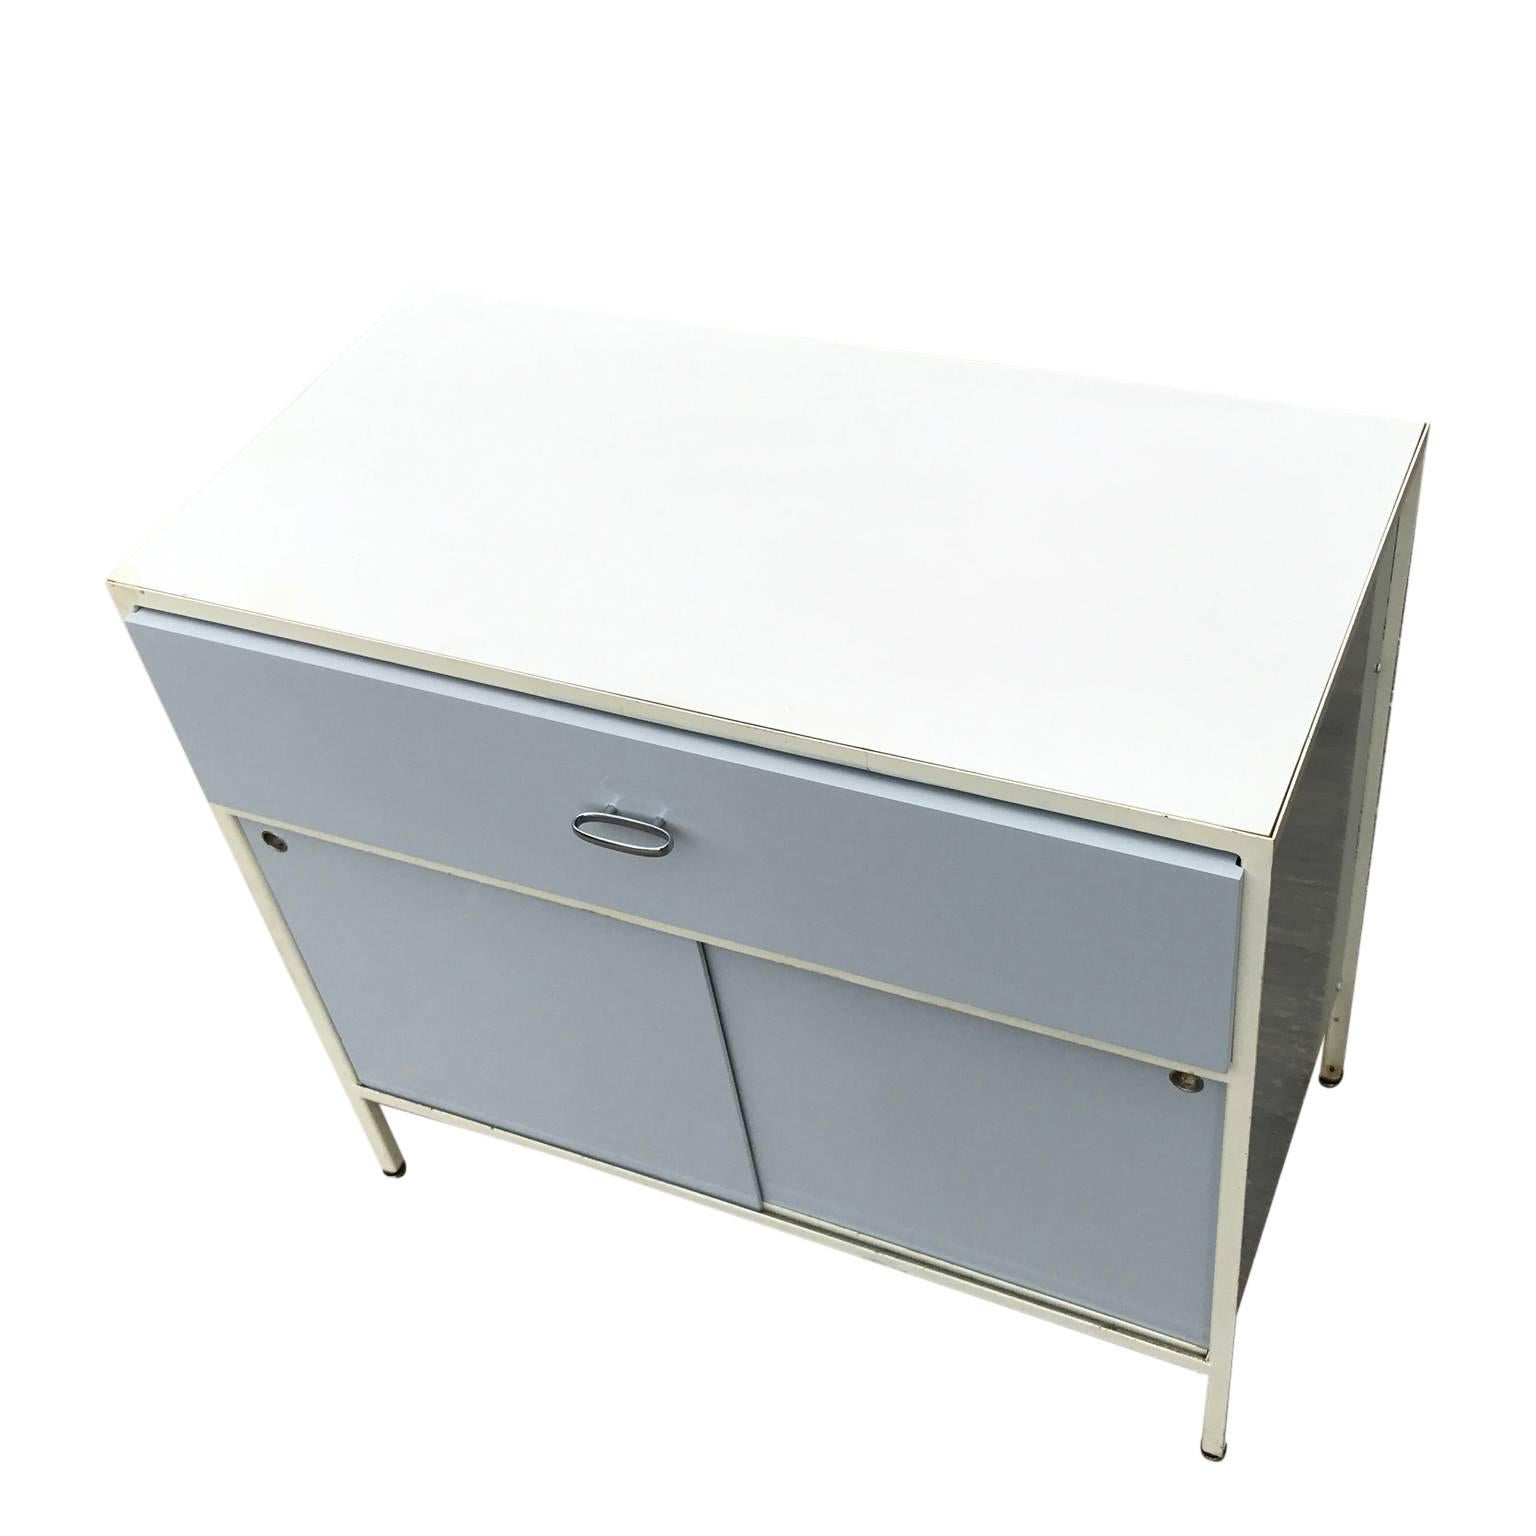 George Nelson Herman Miller steel cabinet in grey. The Cabinets doors, drawers, and side have been restored in grey lacquer. The back retains the original green color. Inside the drawer the label is intact. The white paint on the steel not in